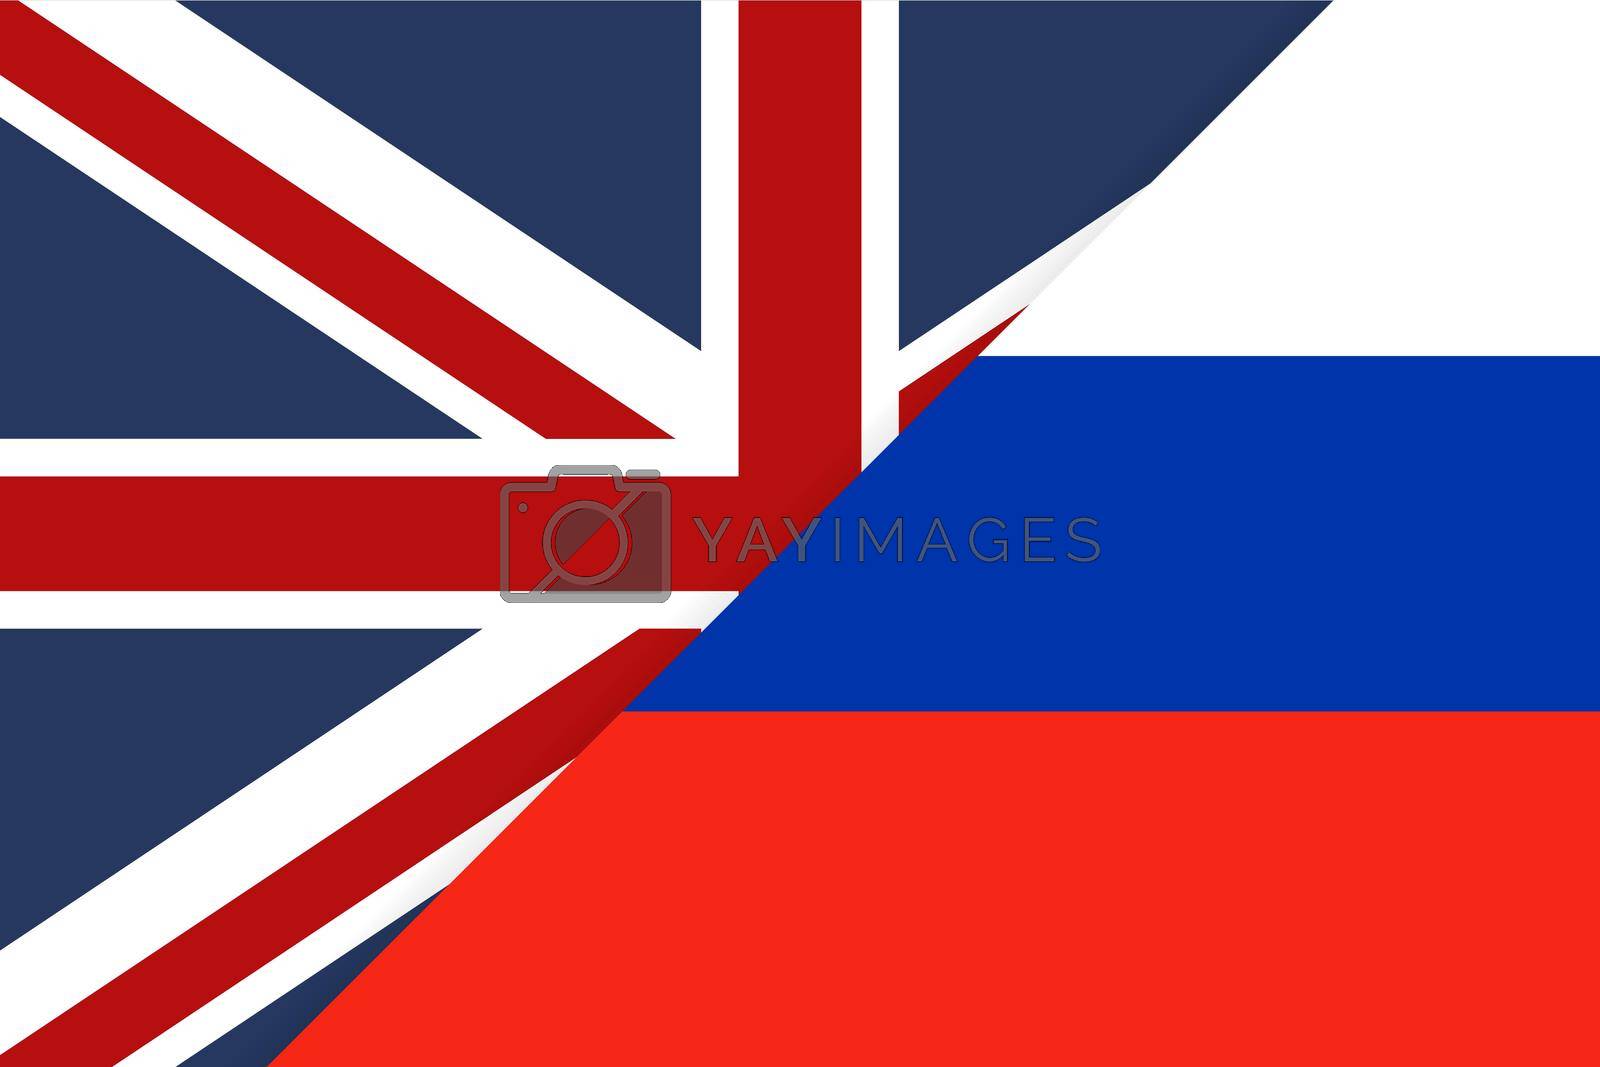 Royalty free image of United Kingdom vs Russia flags by misteremil